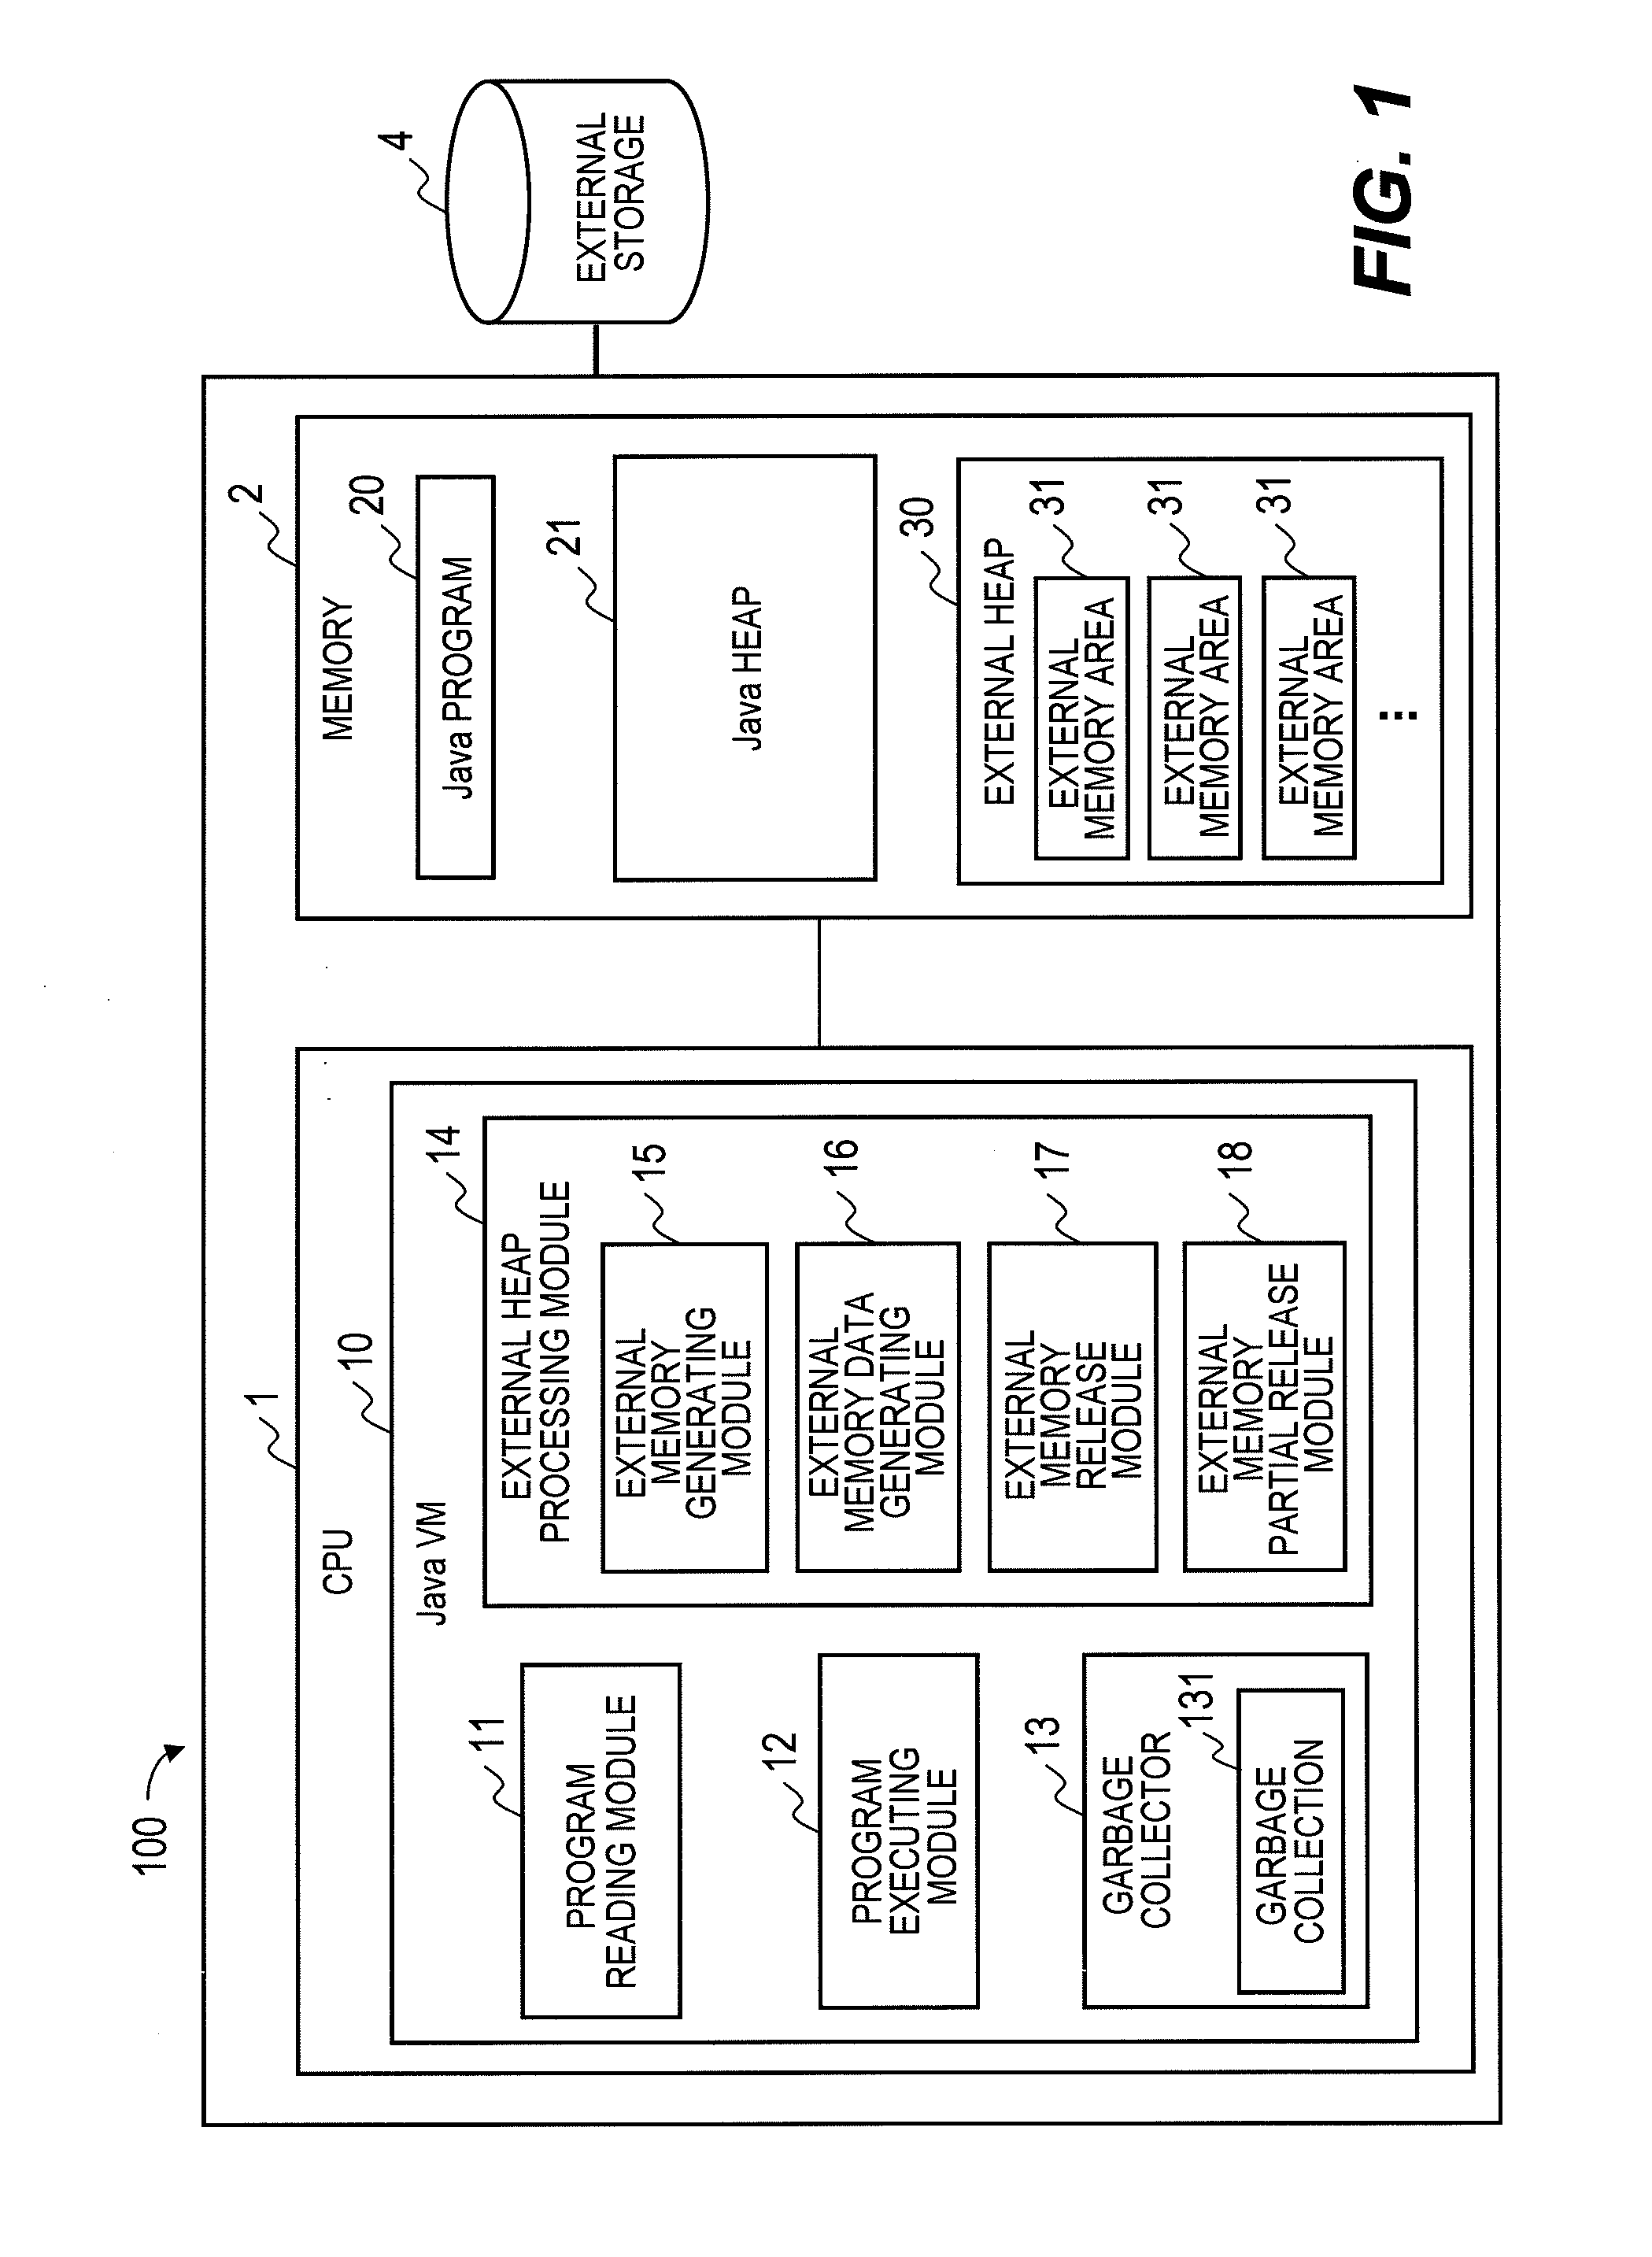 Memory management method, computer system and computer readable medium